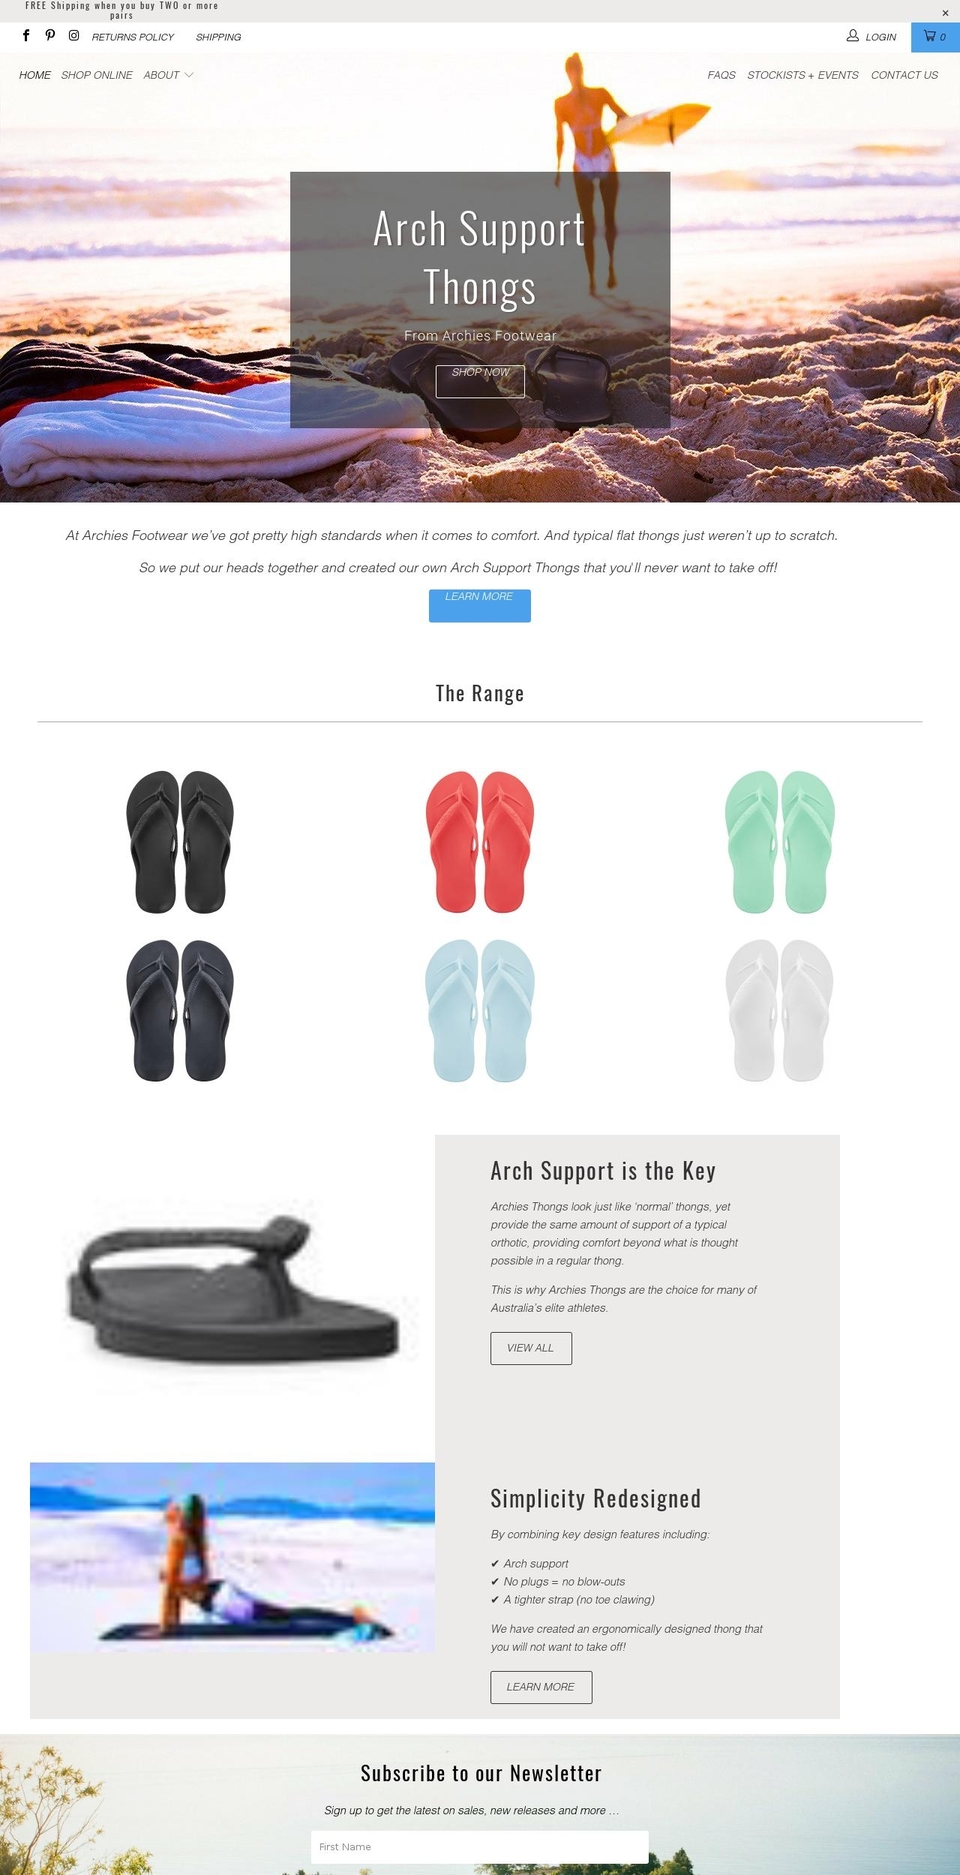 2018-07-02 (Alex Customisations) Shopify theme site example archiesfootware.com